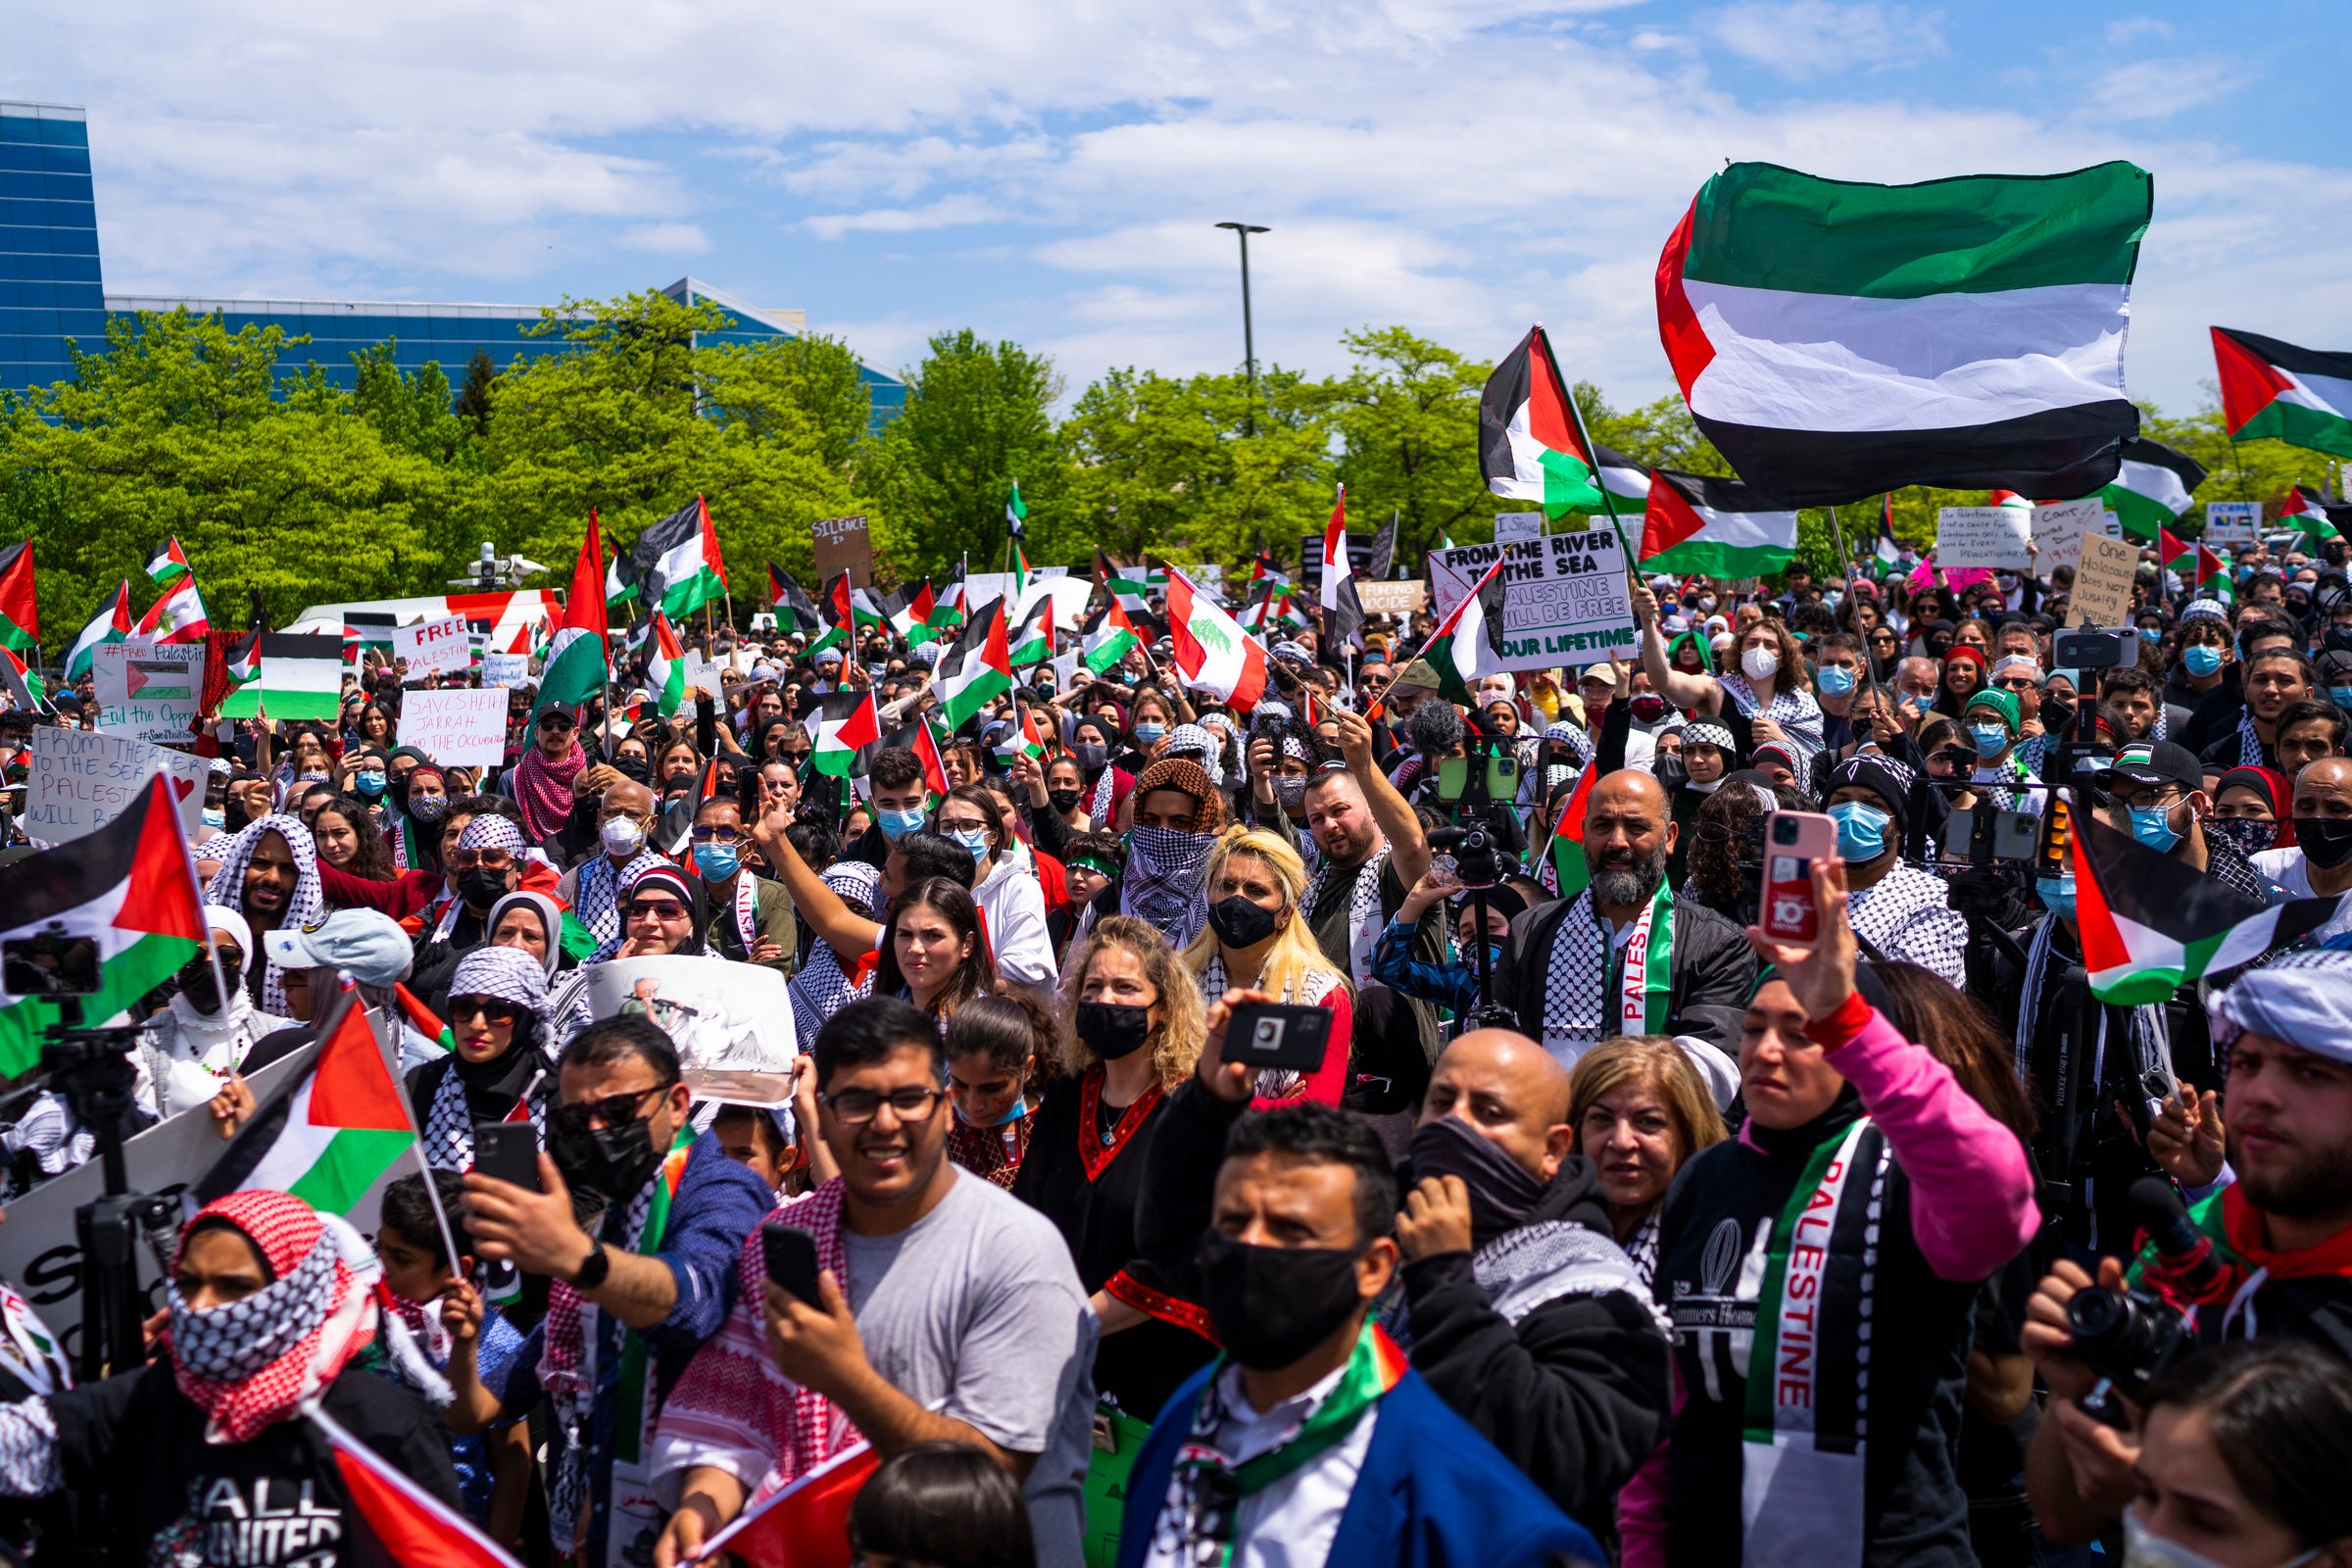 Nearly 2,000 march in Dearborn in support of Palestinians amid violence